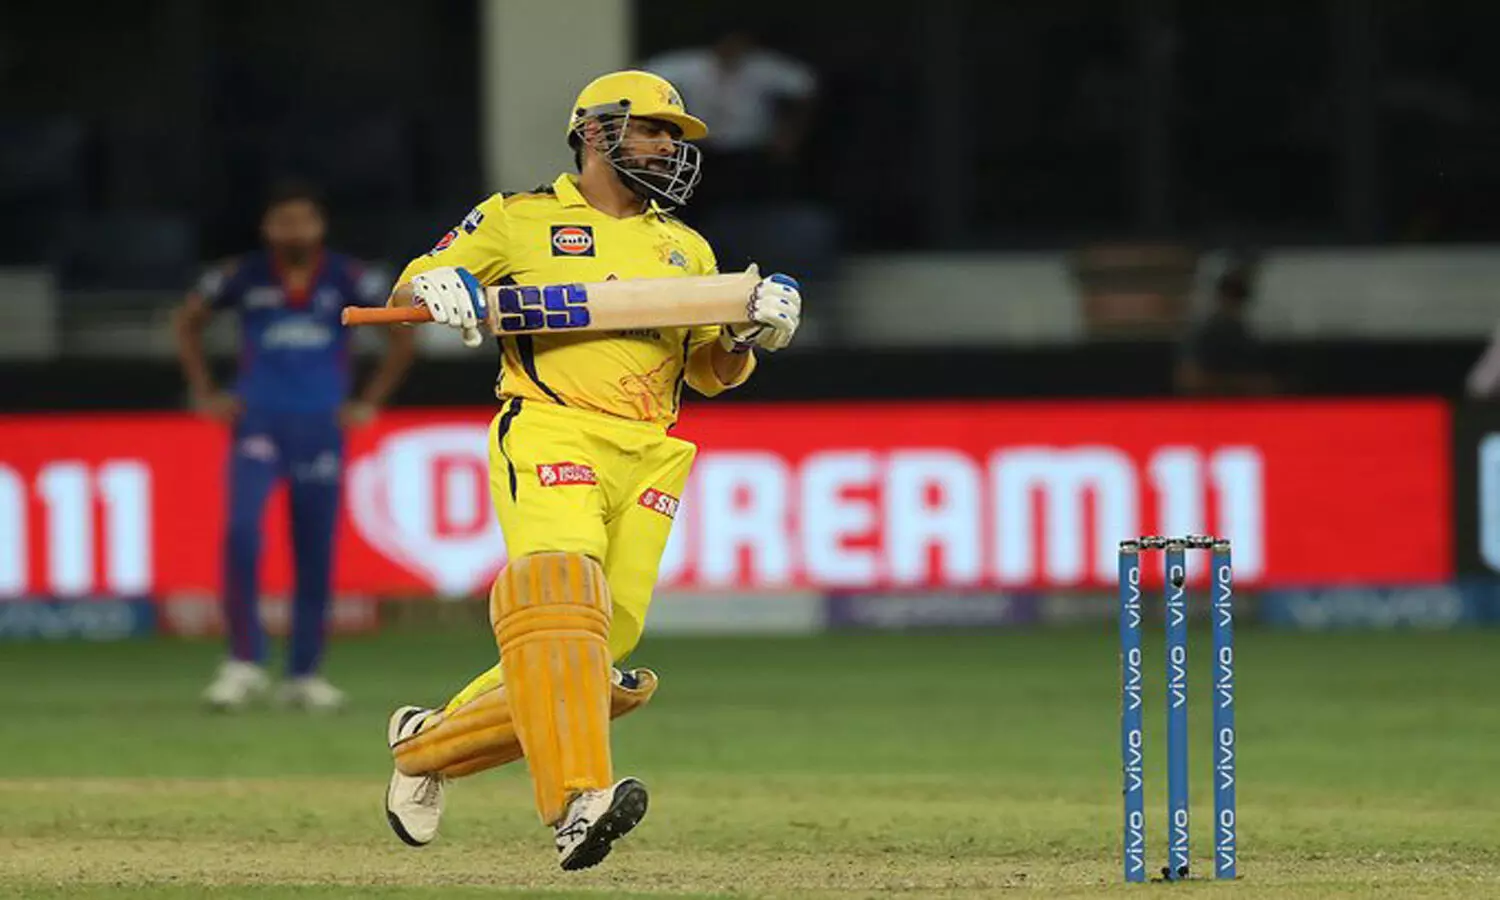 IPL 2022 CSK Full Schedule: MS Dhonis Chennai Super Kings Time Table, match timings, date, venues and full squad here